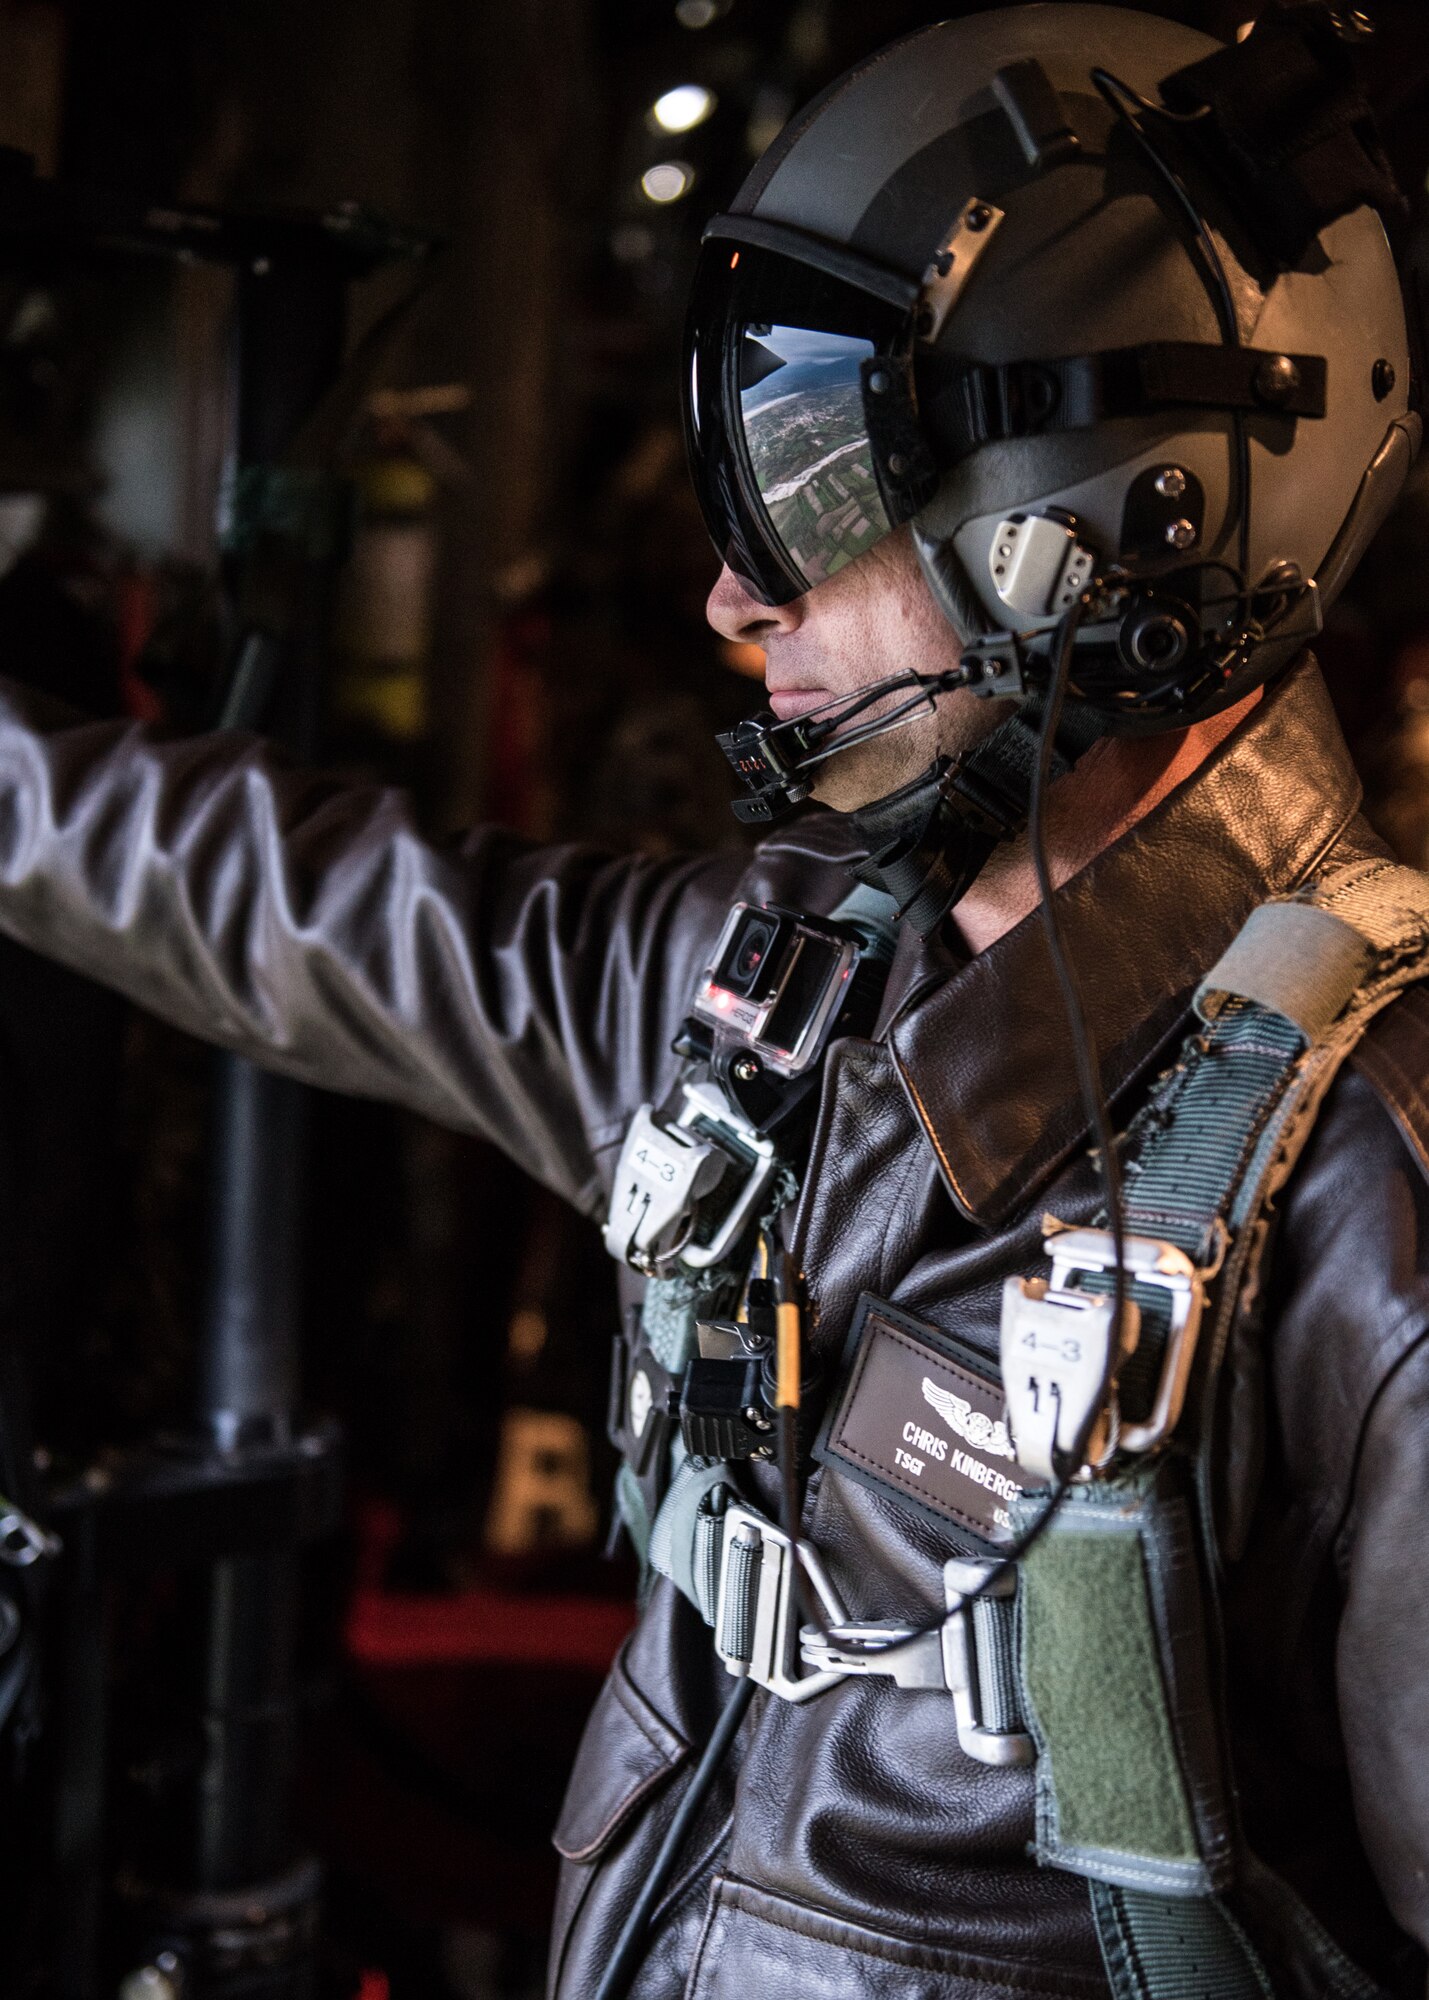 Tech. Sgt. Chris Kinberger, a loadmaster with Kentucky Air National Guard’s 165th Airlift Squadron, prepares to execute an airdrop mission with members from the Italian Army Folgore paratrooper brigade Nov. 7, 2019, in Pisa, Italy. The mission was part of Mangusta 19, a bi-lateral exercise designed to promote readiness and interoperability among NATO allies. (U.S. Air National Guard photo by Senior Airman Chloe Ochs)